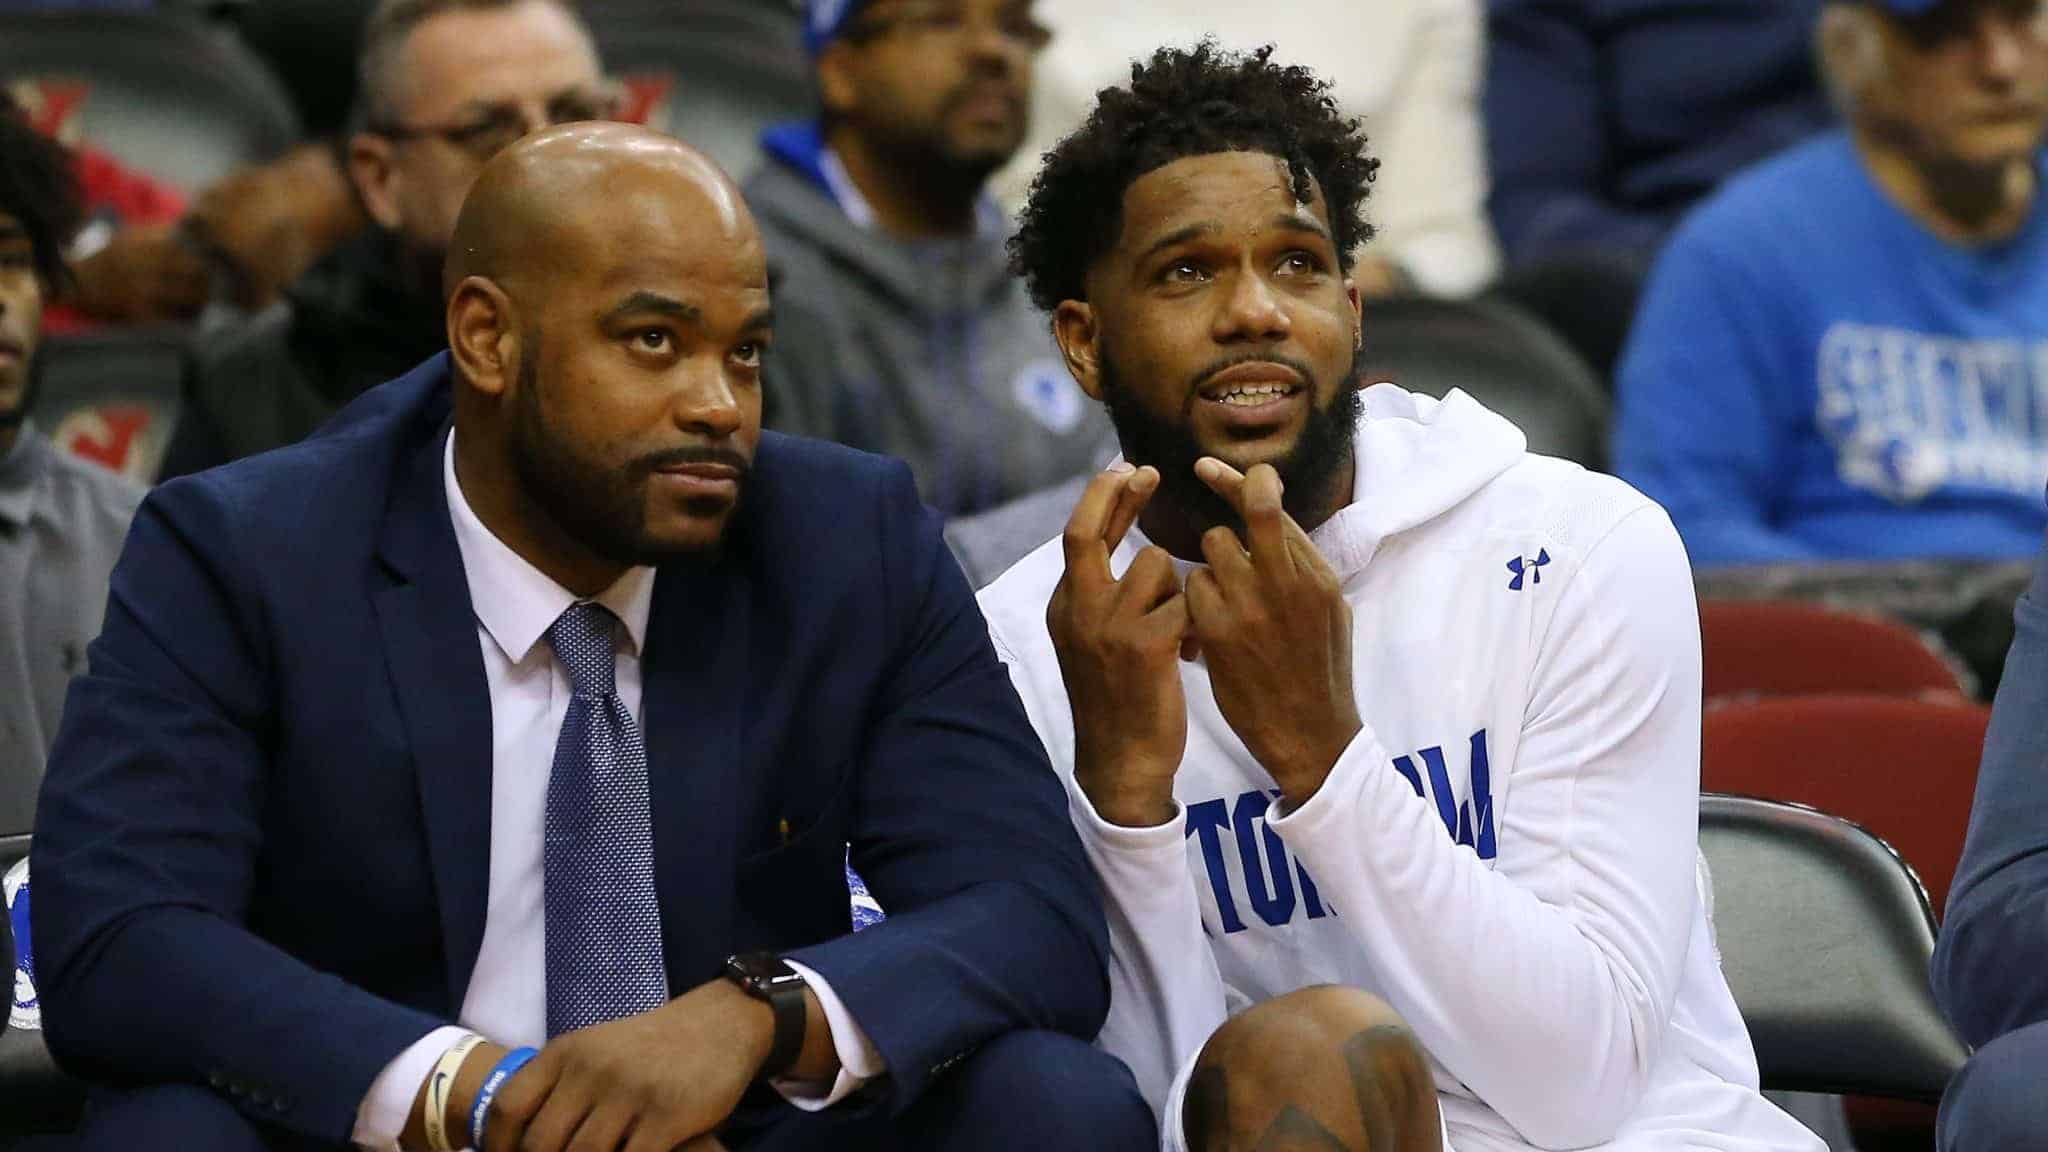 NEWARK, NJ - NOVEMBER 23: Myles Powell #13 of the Seton Hall Pirates crosses his fingers while sitting next to assistant coach Brandon Hall during the second half of a college basketball game against the Florida A&M Rattlers at Prudential Center on November 23, 2019 in Newark, New Jersey. Seton Hall defeated Florida A&M 87-51.